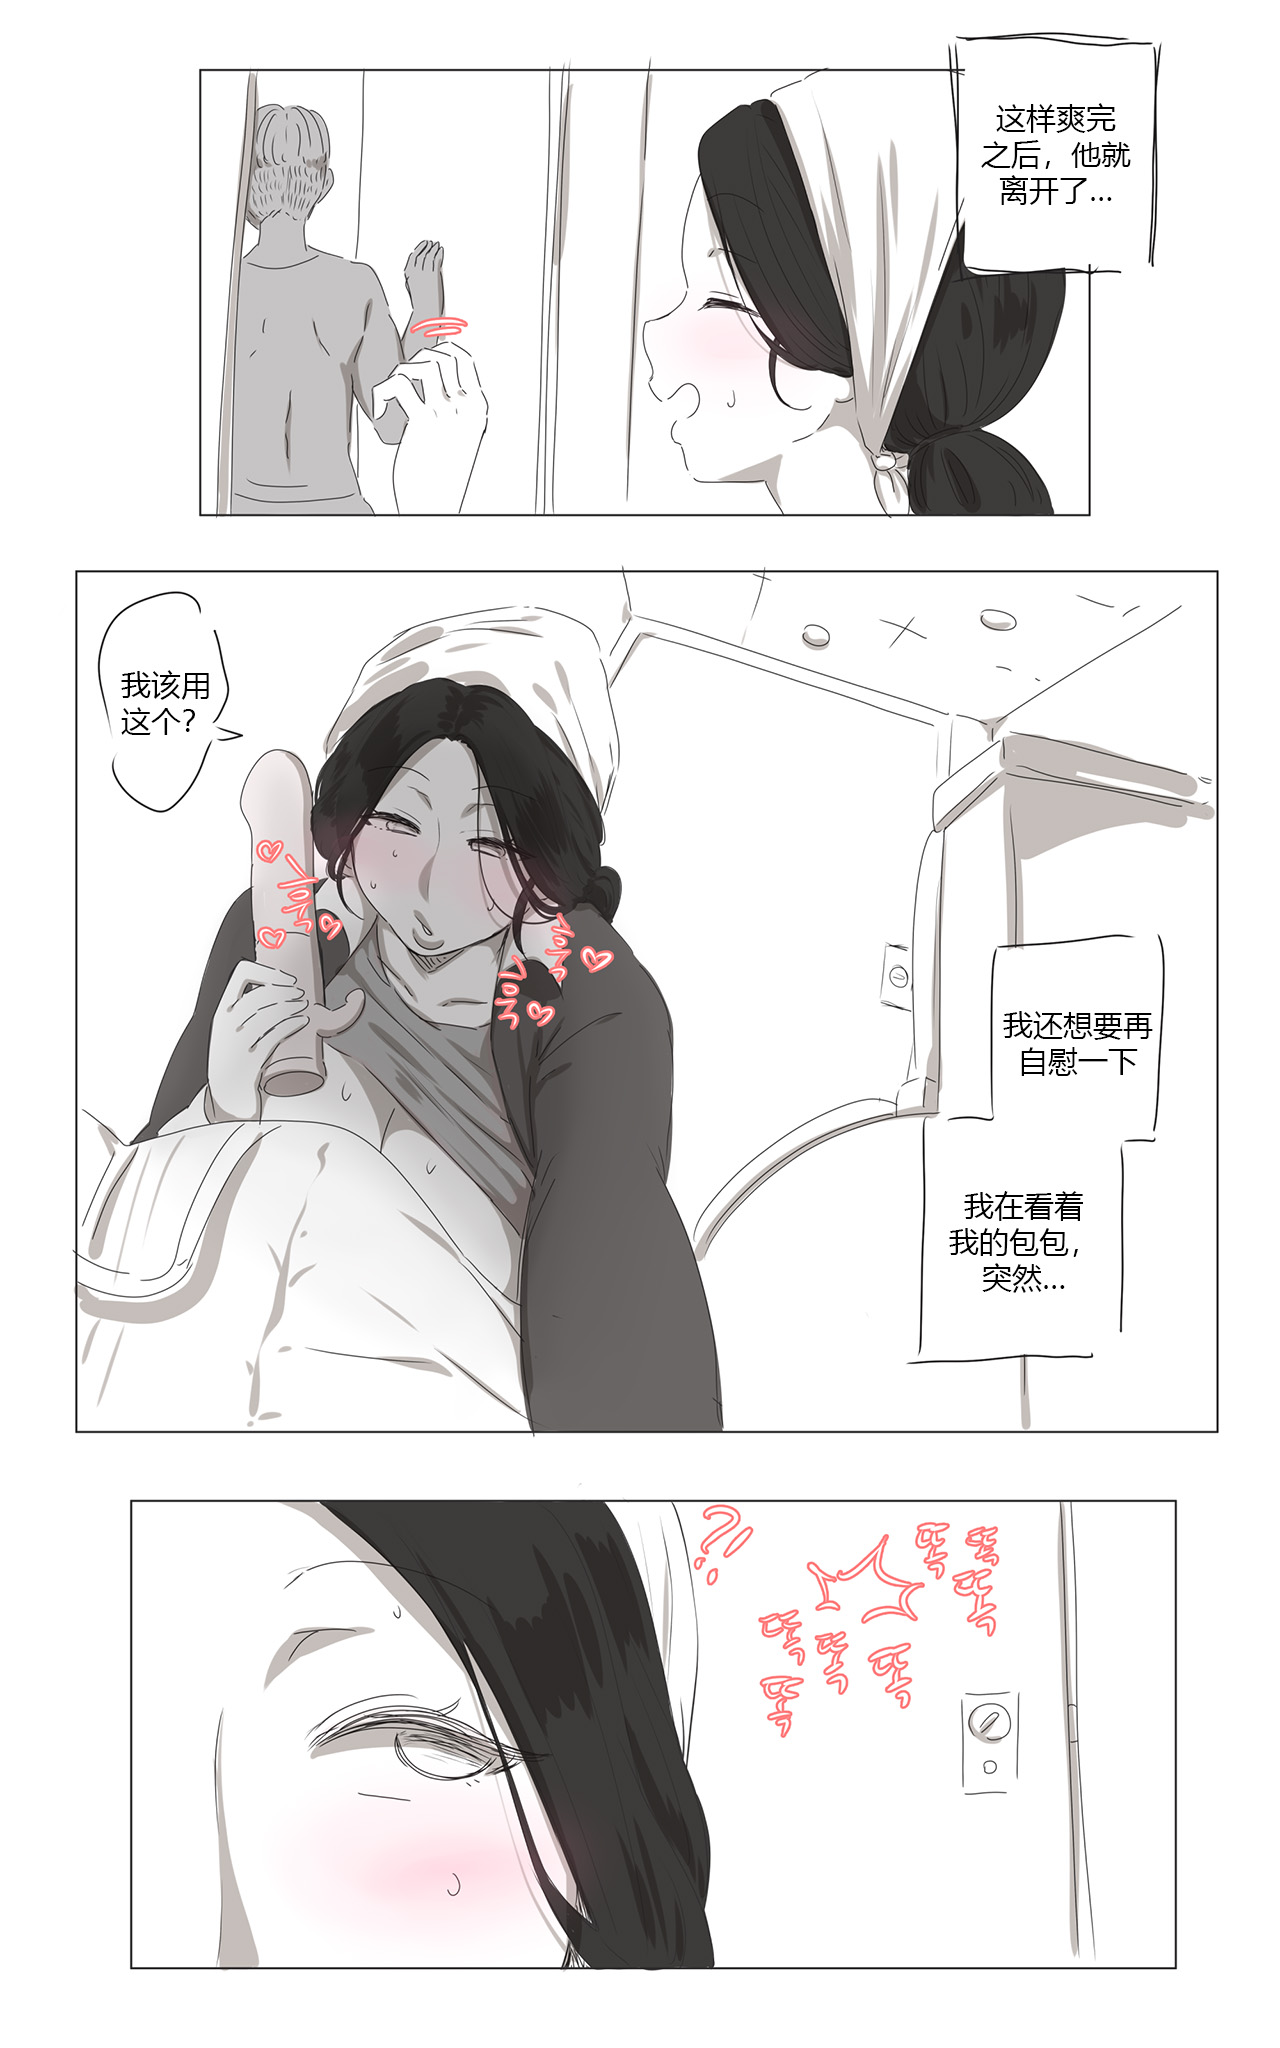 [Ooyun]The Cleaning Lady